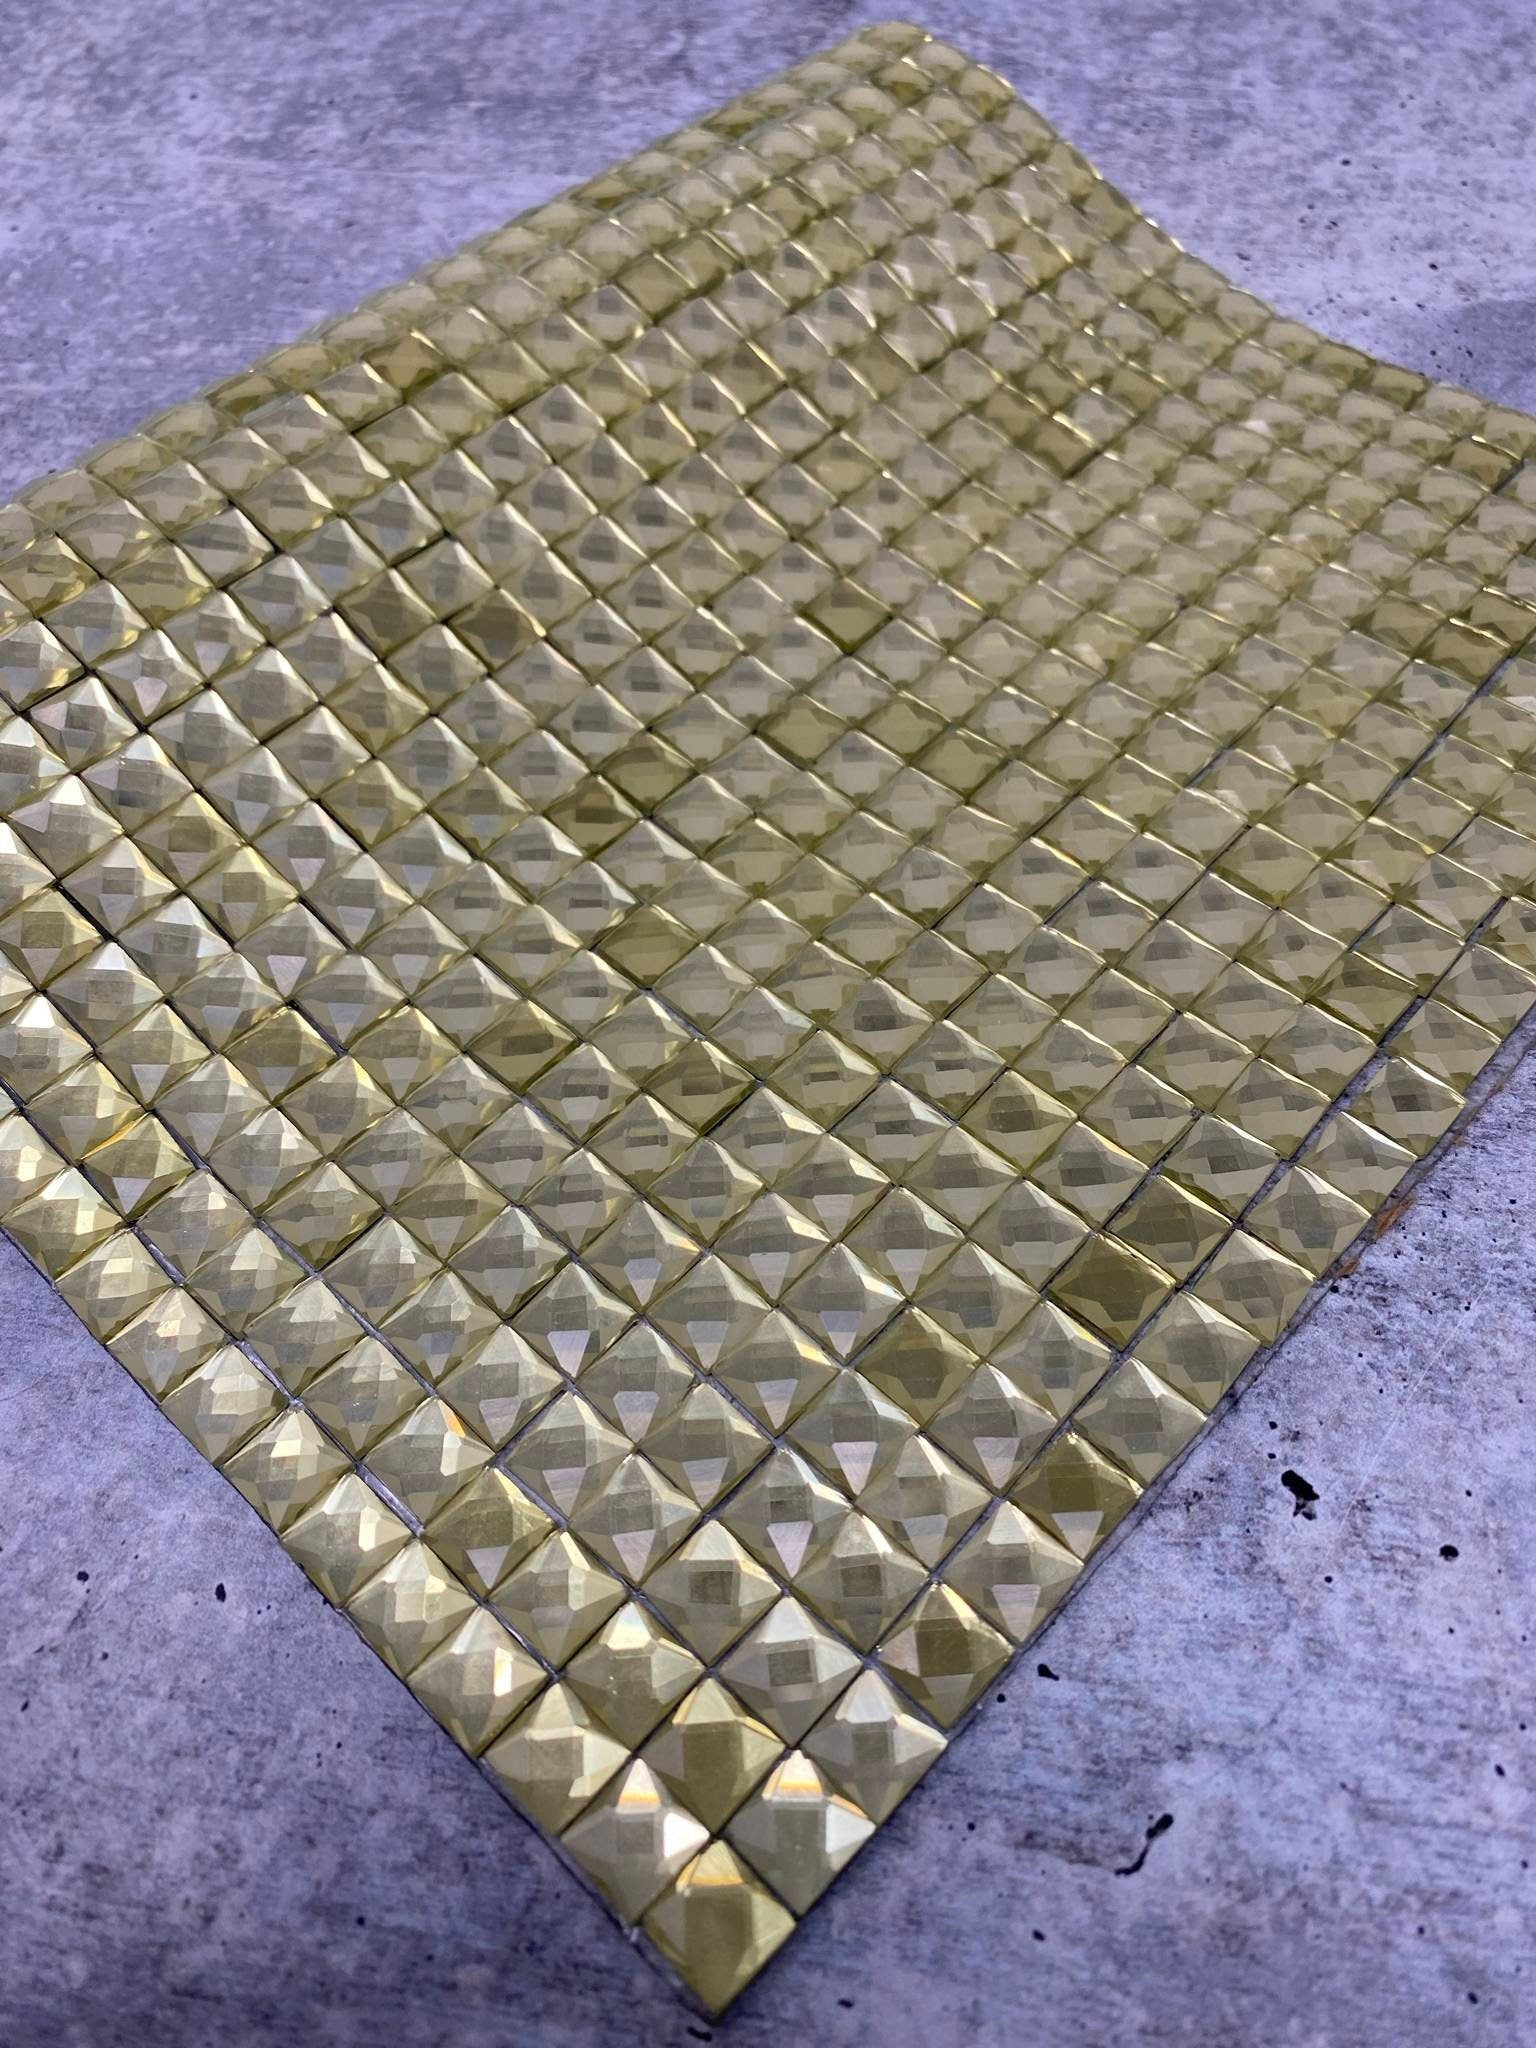 Glass "YELLOW" Squares,Hot-fix Rhinestone Sheet for Blinging Clothes, Shoes, Handbags, Wine Glasses & More, 10" x 16.5" sz, 135 Squares